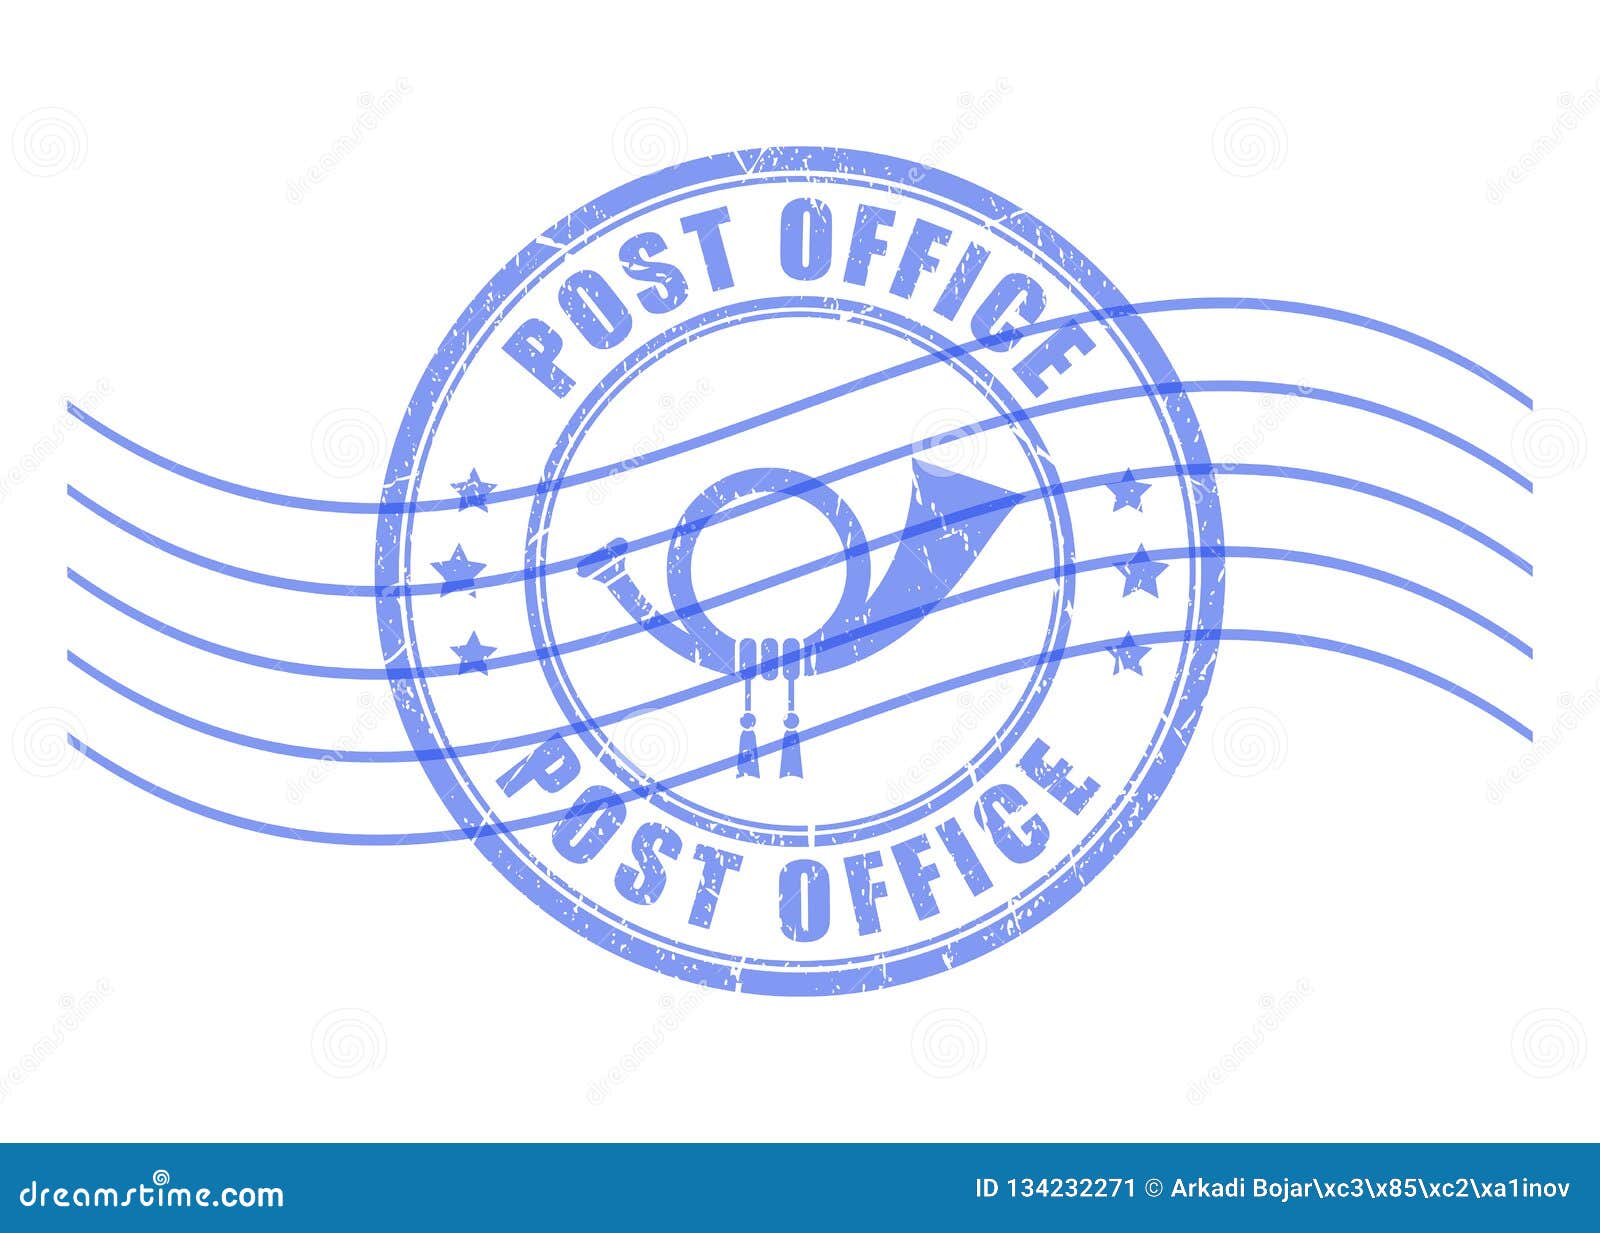 Post office stamp stock vector. Illustration of mailings - 134232271